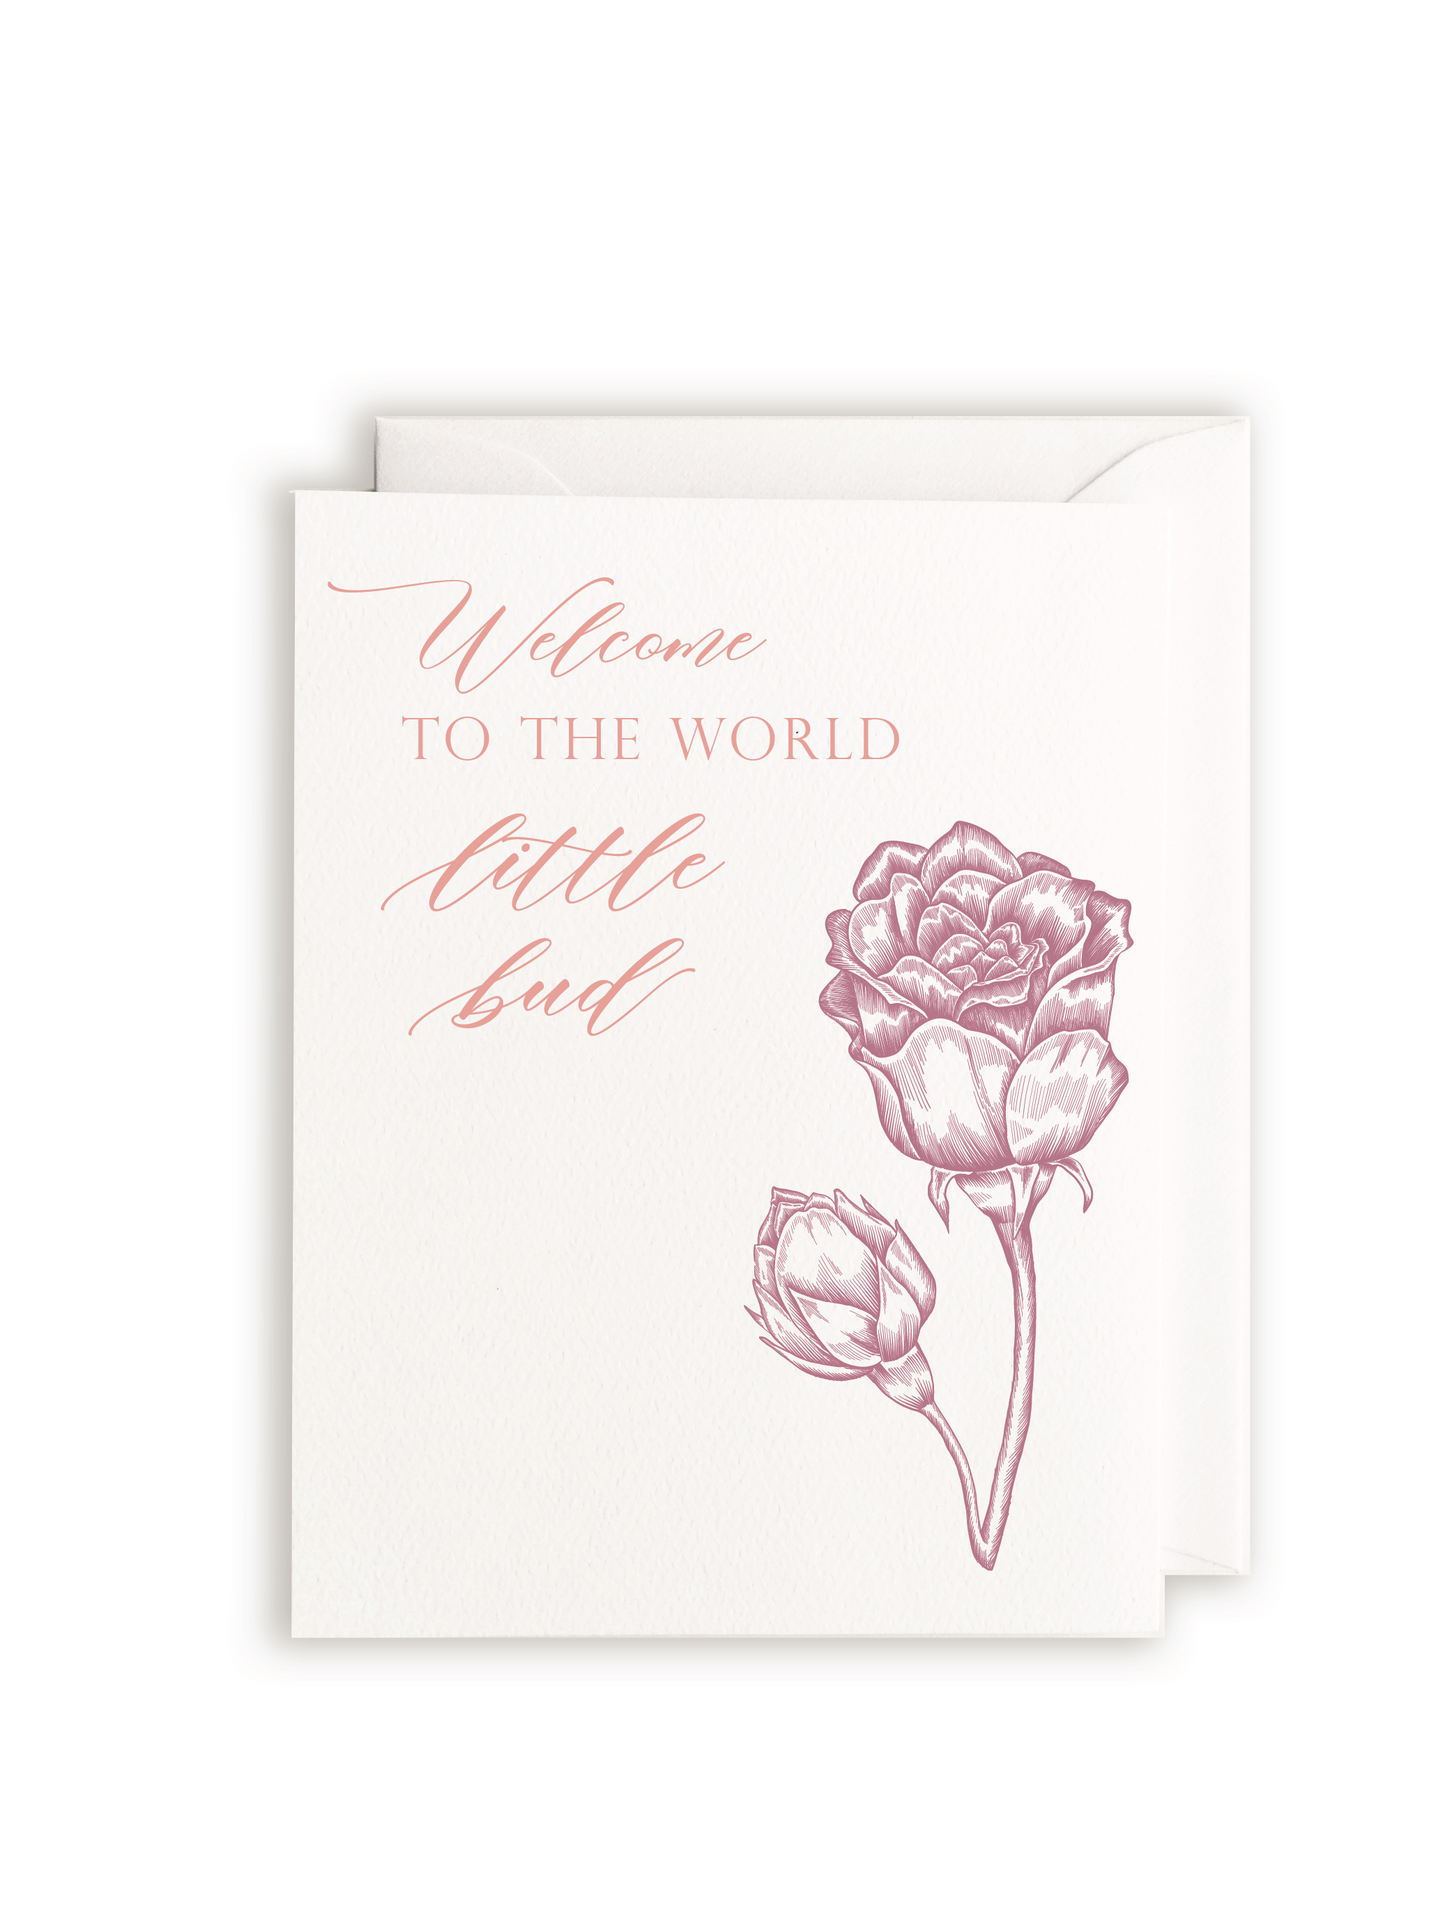 Welcome To The World Little Bud Letterpress Greeting Card-Rust Belt Love Paperie